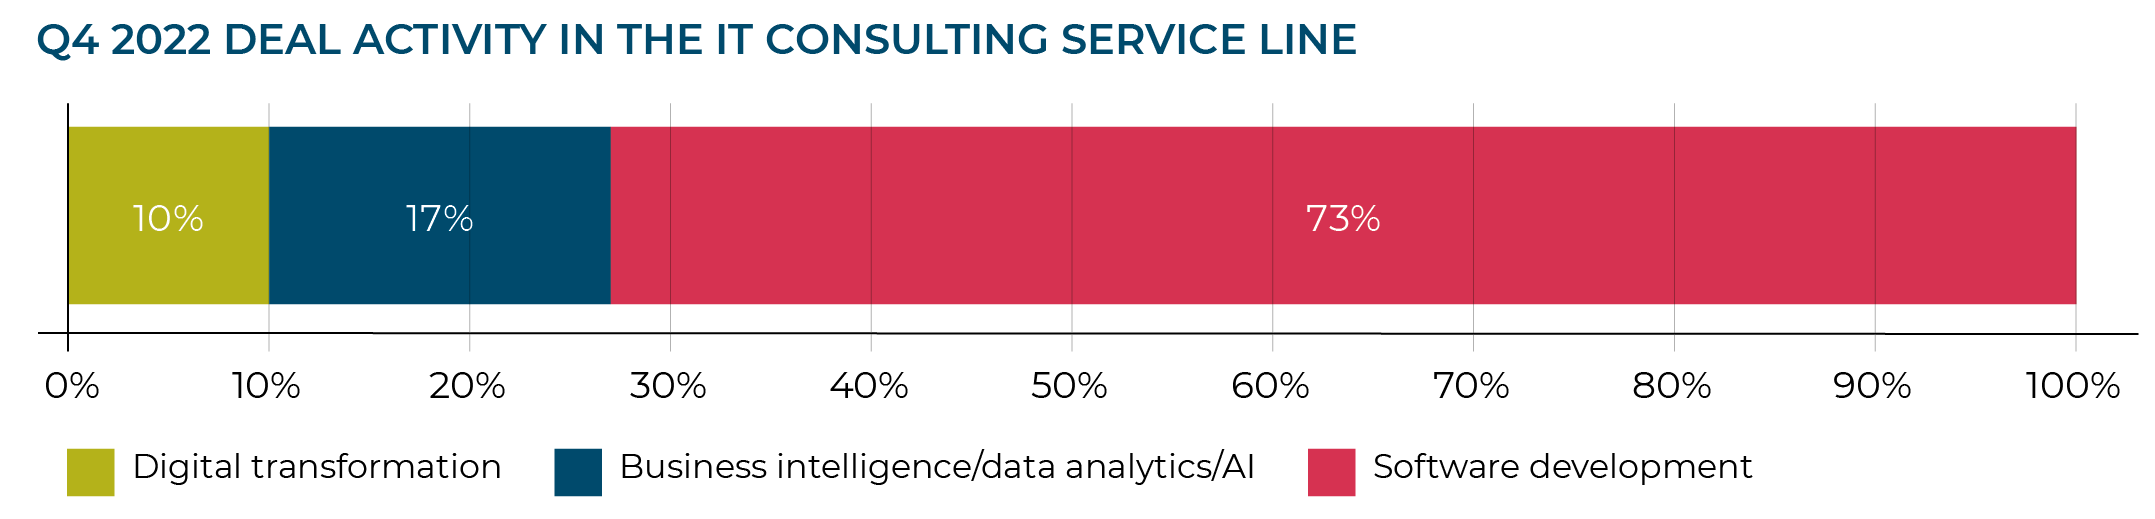 Q4 2022 DEAL ACTIVITY IN THE IT CONSULTING SERVICE LINE